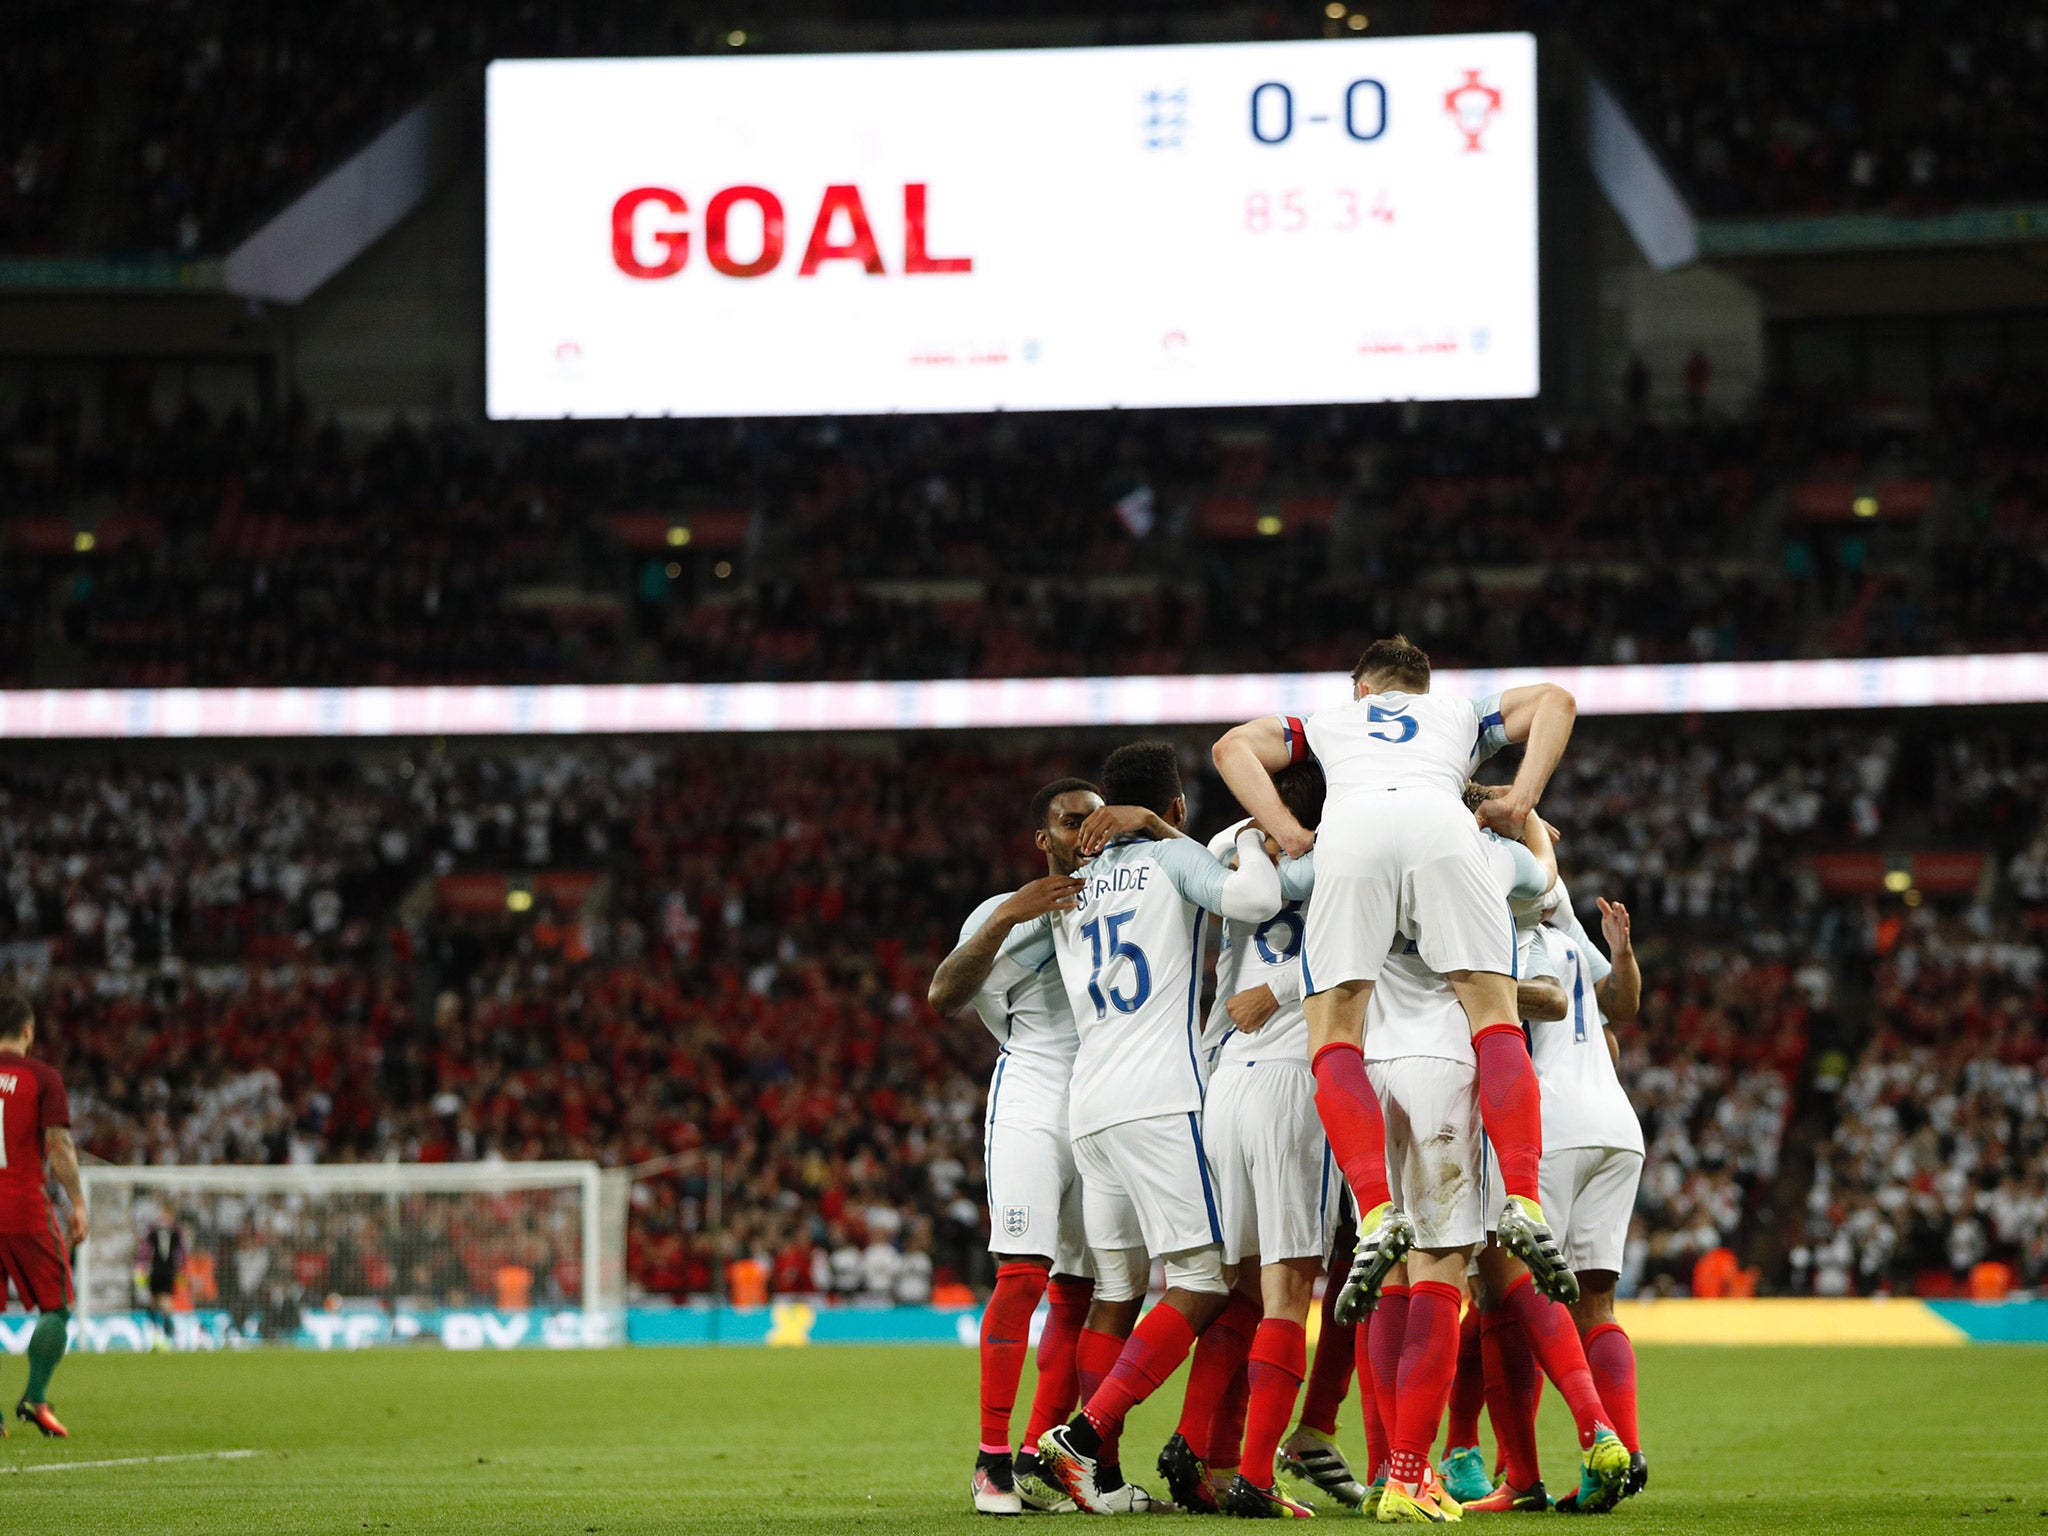 England celebrate after Chris Smalling scores the match-winning goal against Portugal